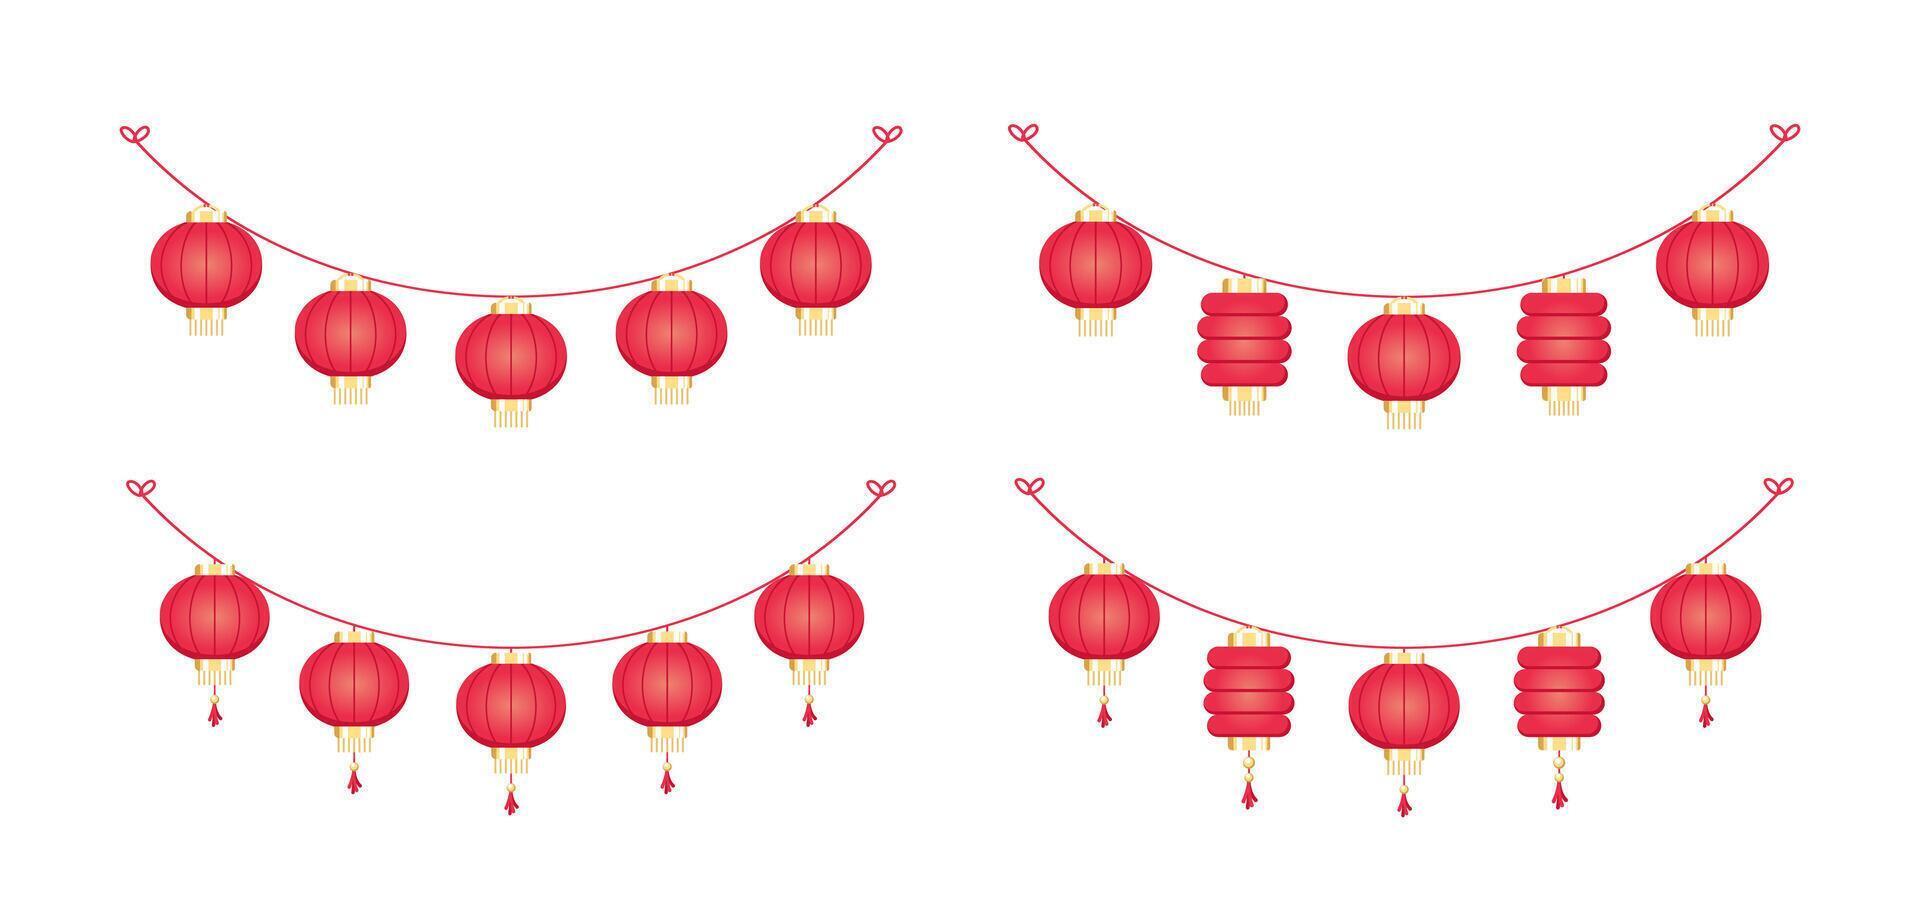 Chinese Lantern Hanging Garland Set, Chinese New Year, Lunar New Year and Mid-Autumn Festival Decoration Graphic vector